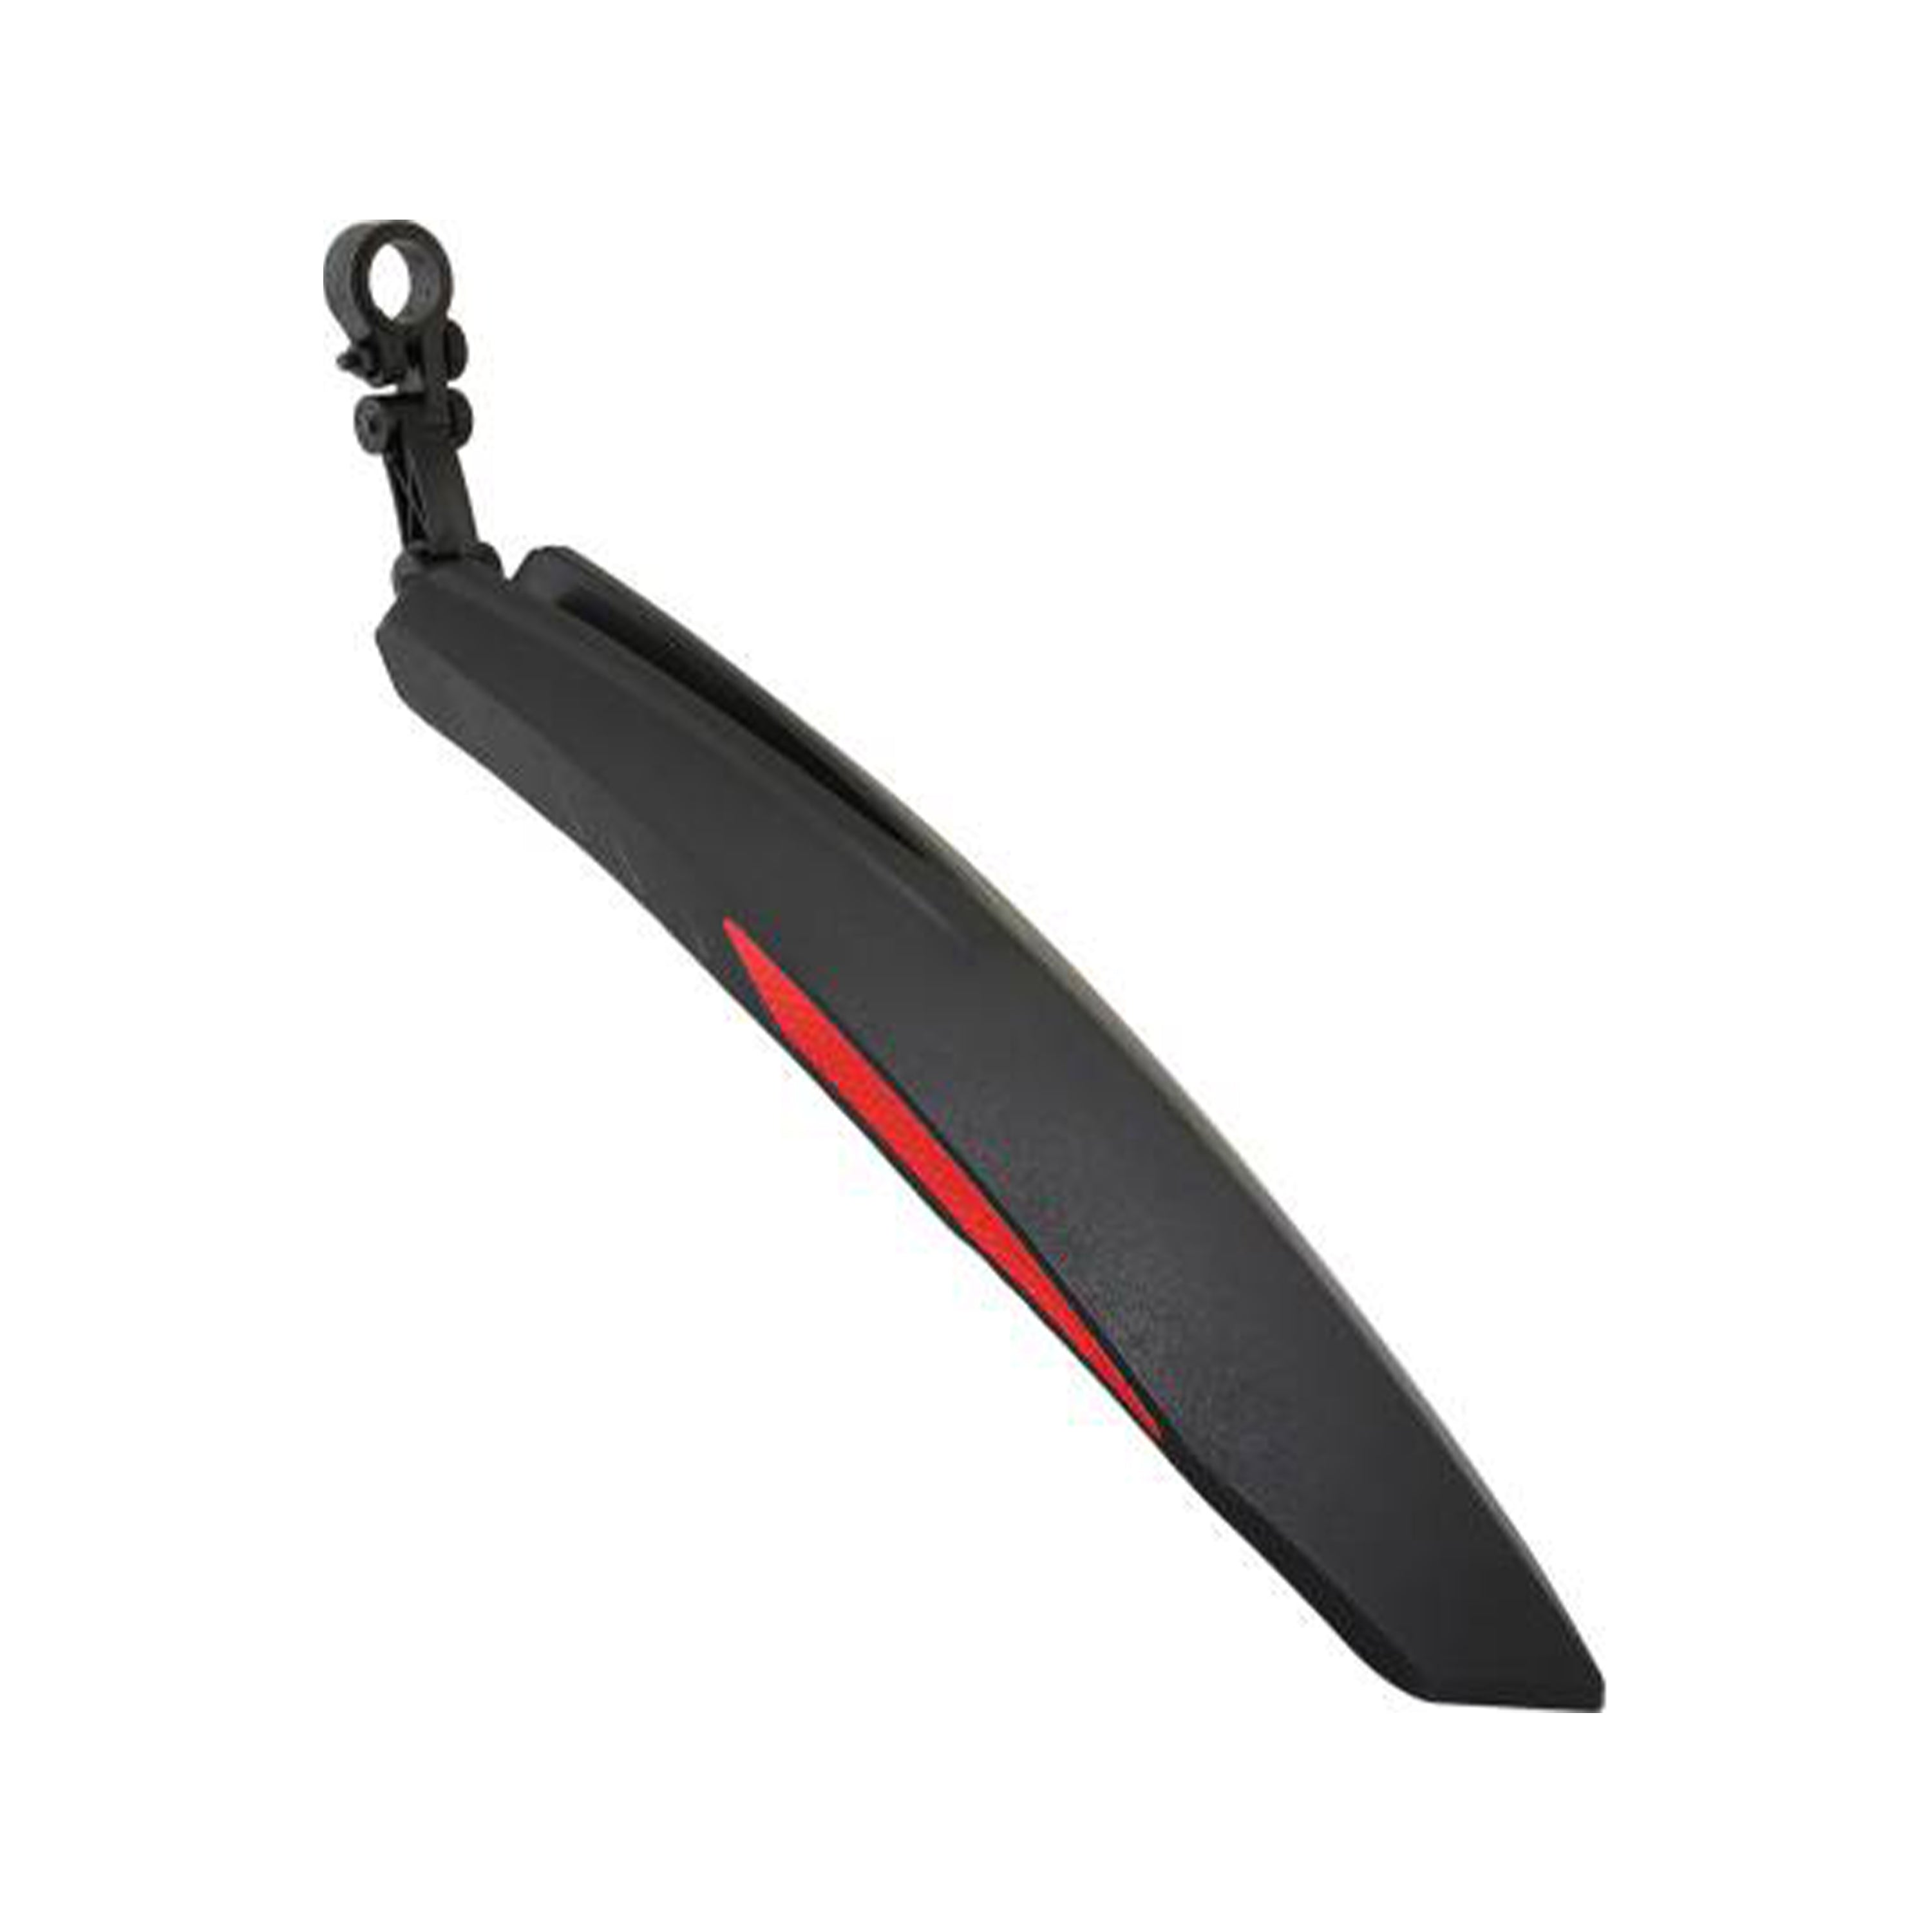 Leader Bicycle Mudguard with Reflective Tape